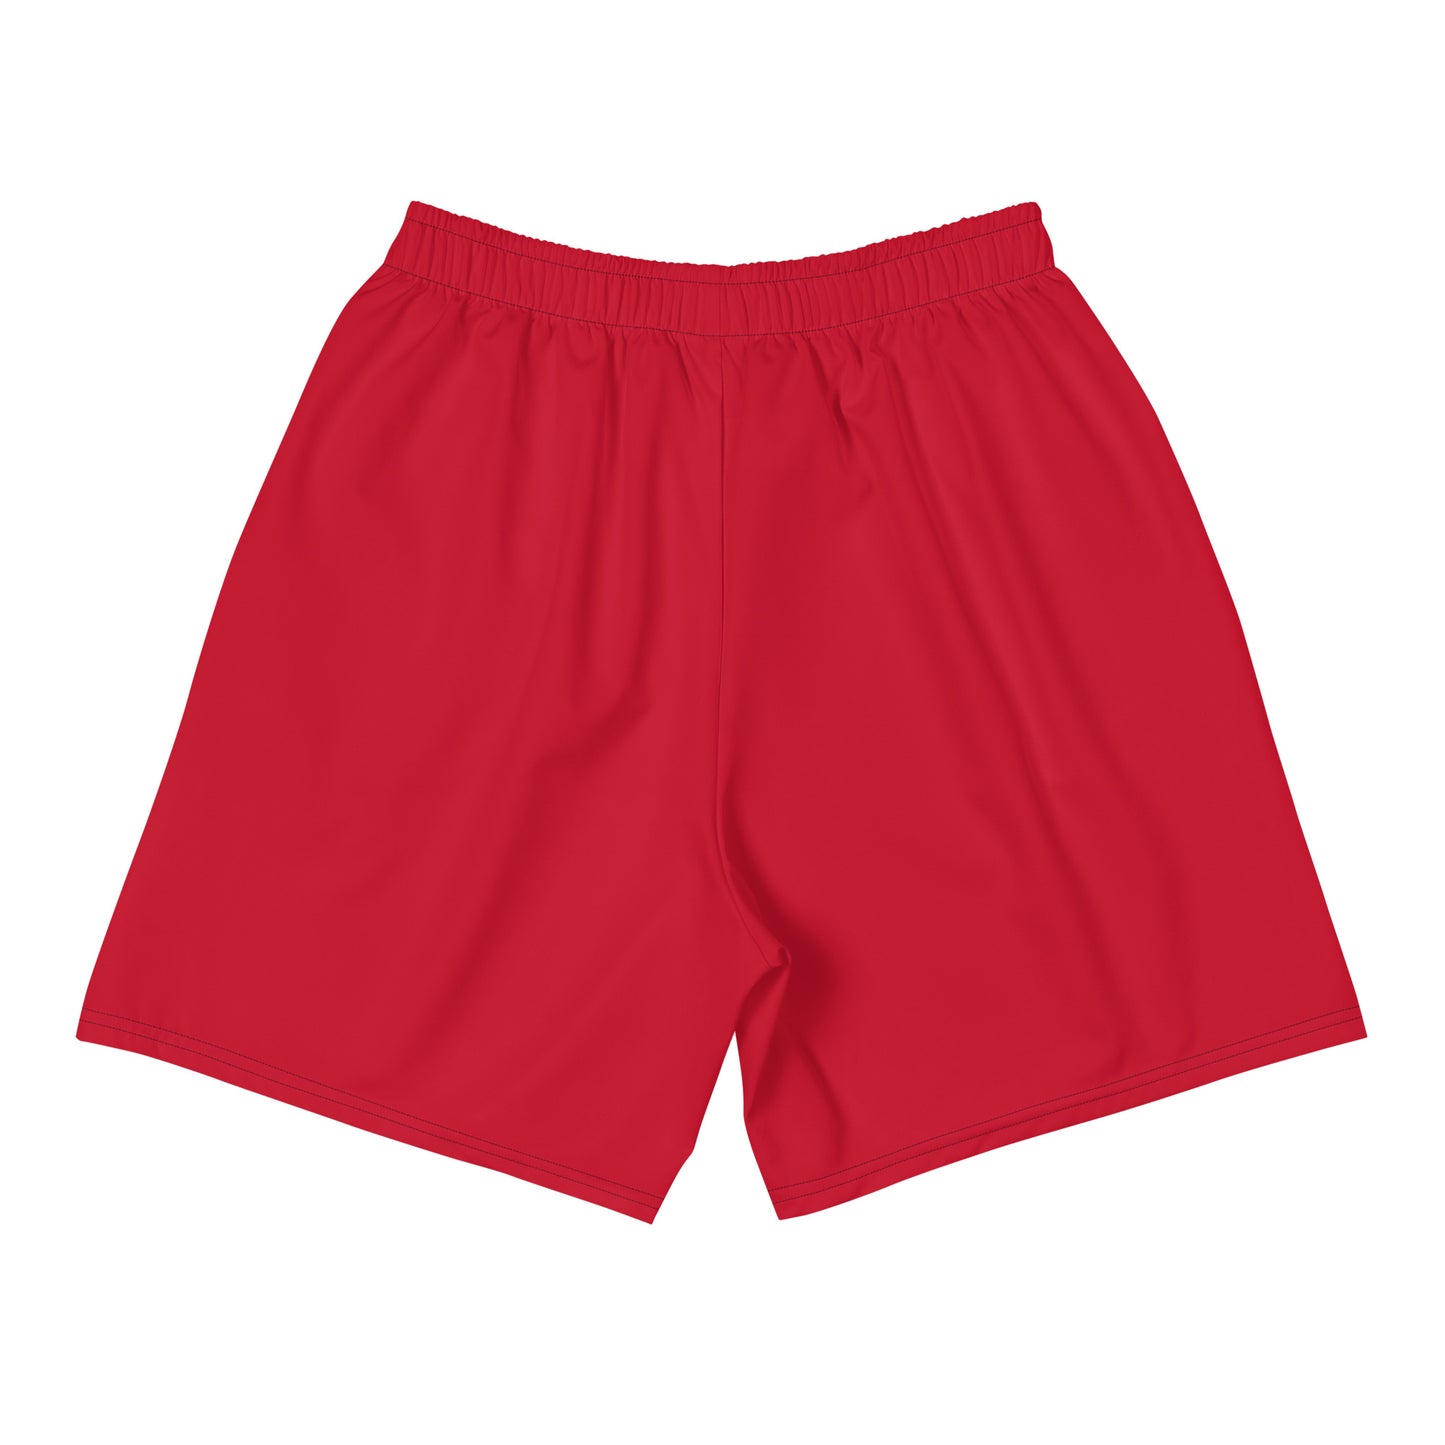 Red Men's Shorts